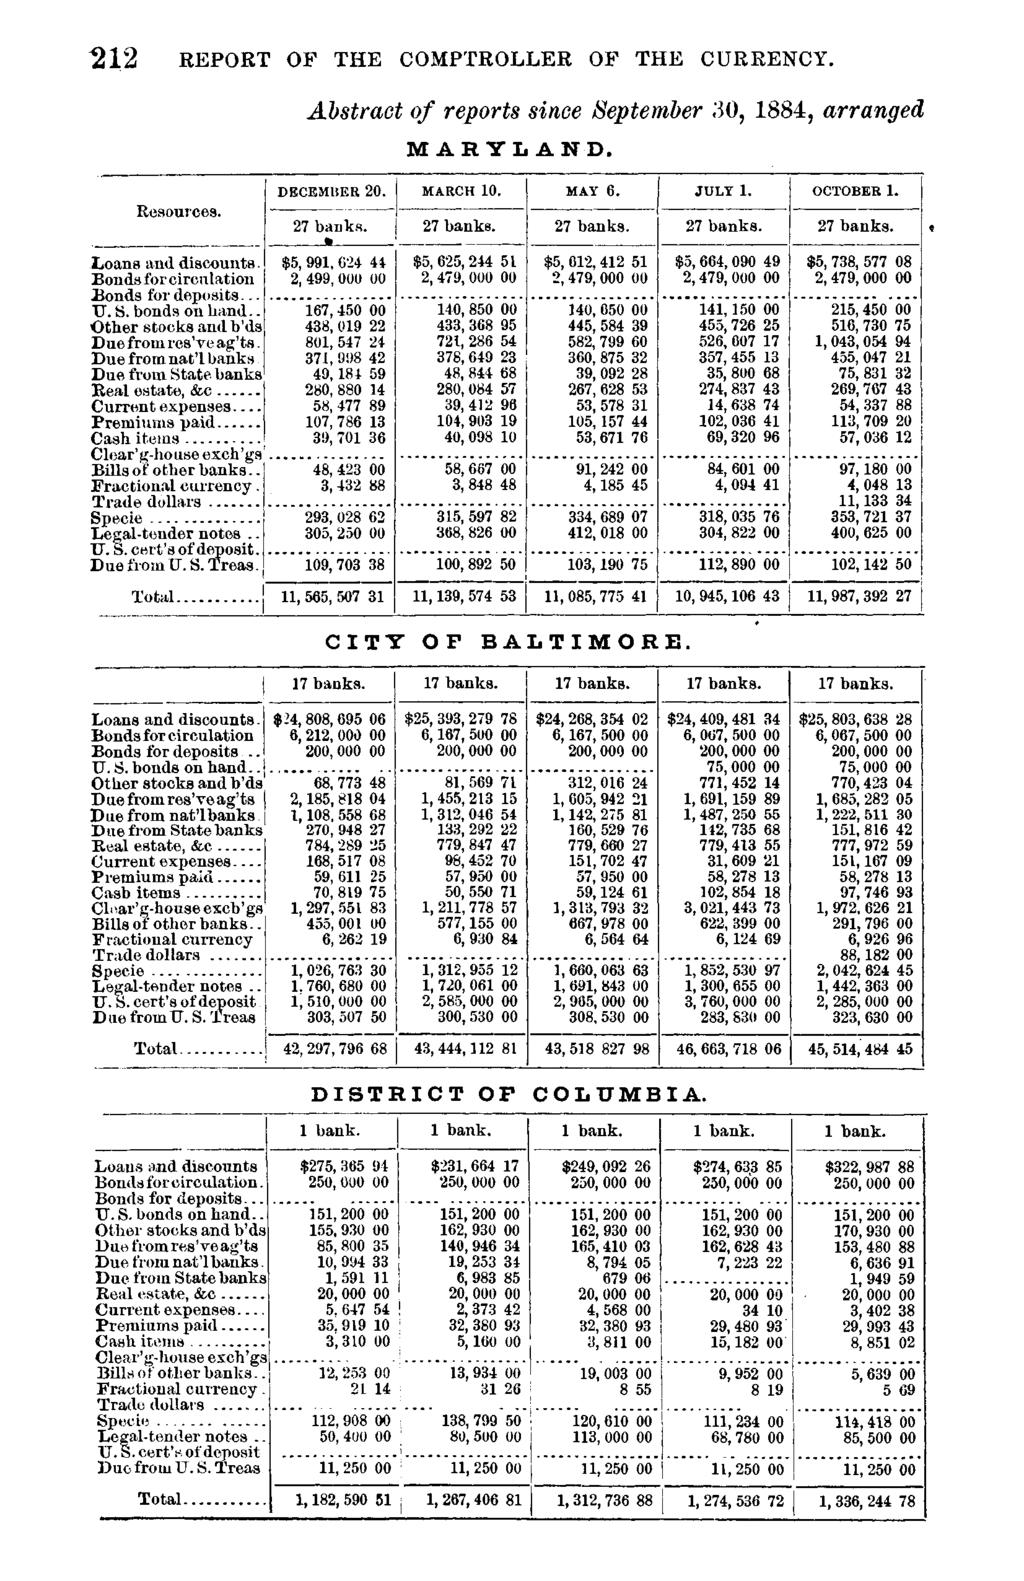 "212 REPORT OF THE COMPTROLLER OF THE CURRENCY. Abstract of reports since September 30, 1884, arranged MARYLAND. Resources. DECEMBER 20. 27 banks. MARCH 10. 27 banks. MAY 6. 27 banks. JULY 1.